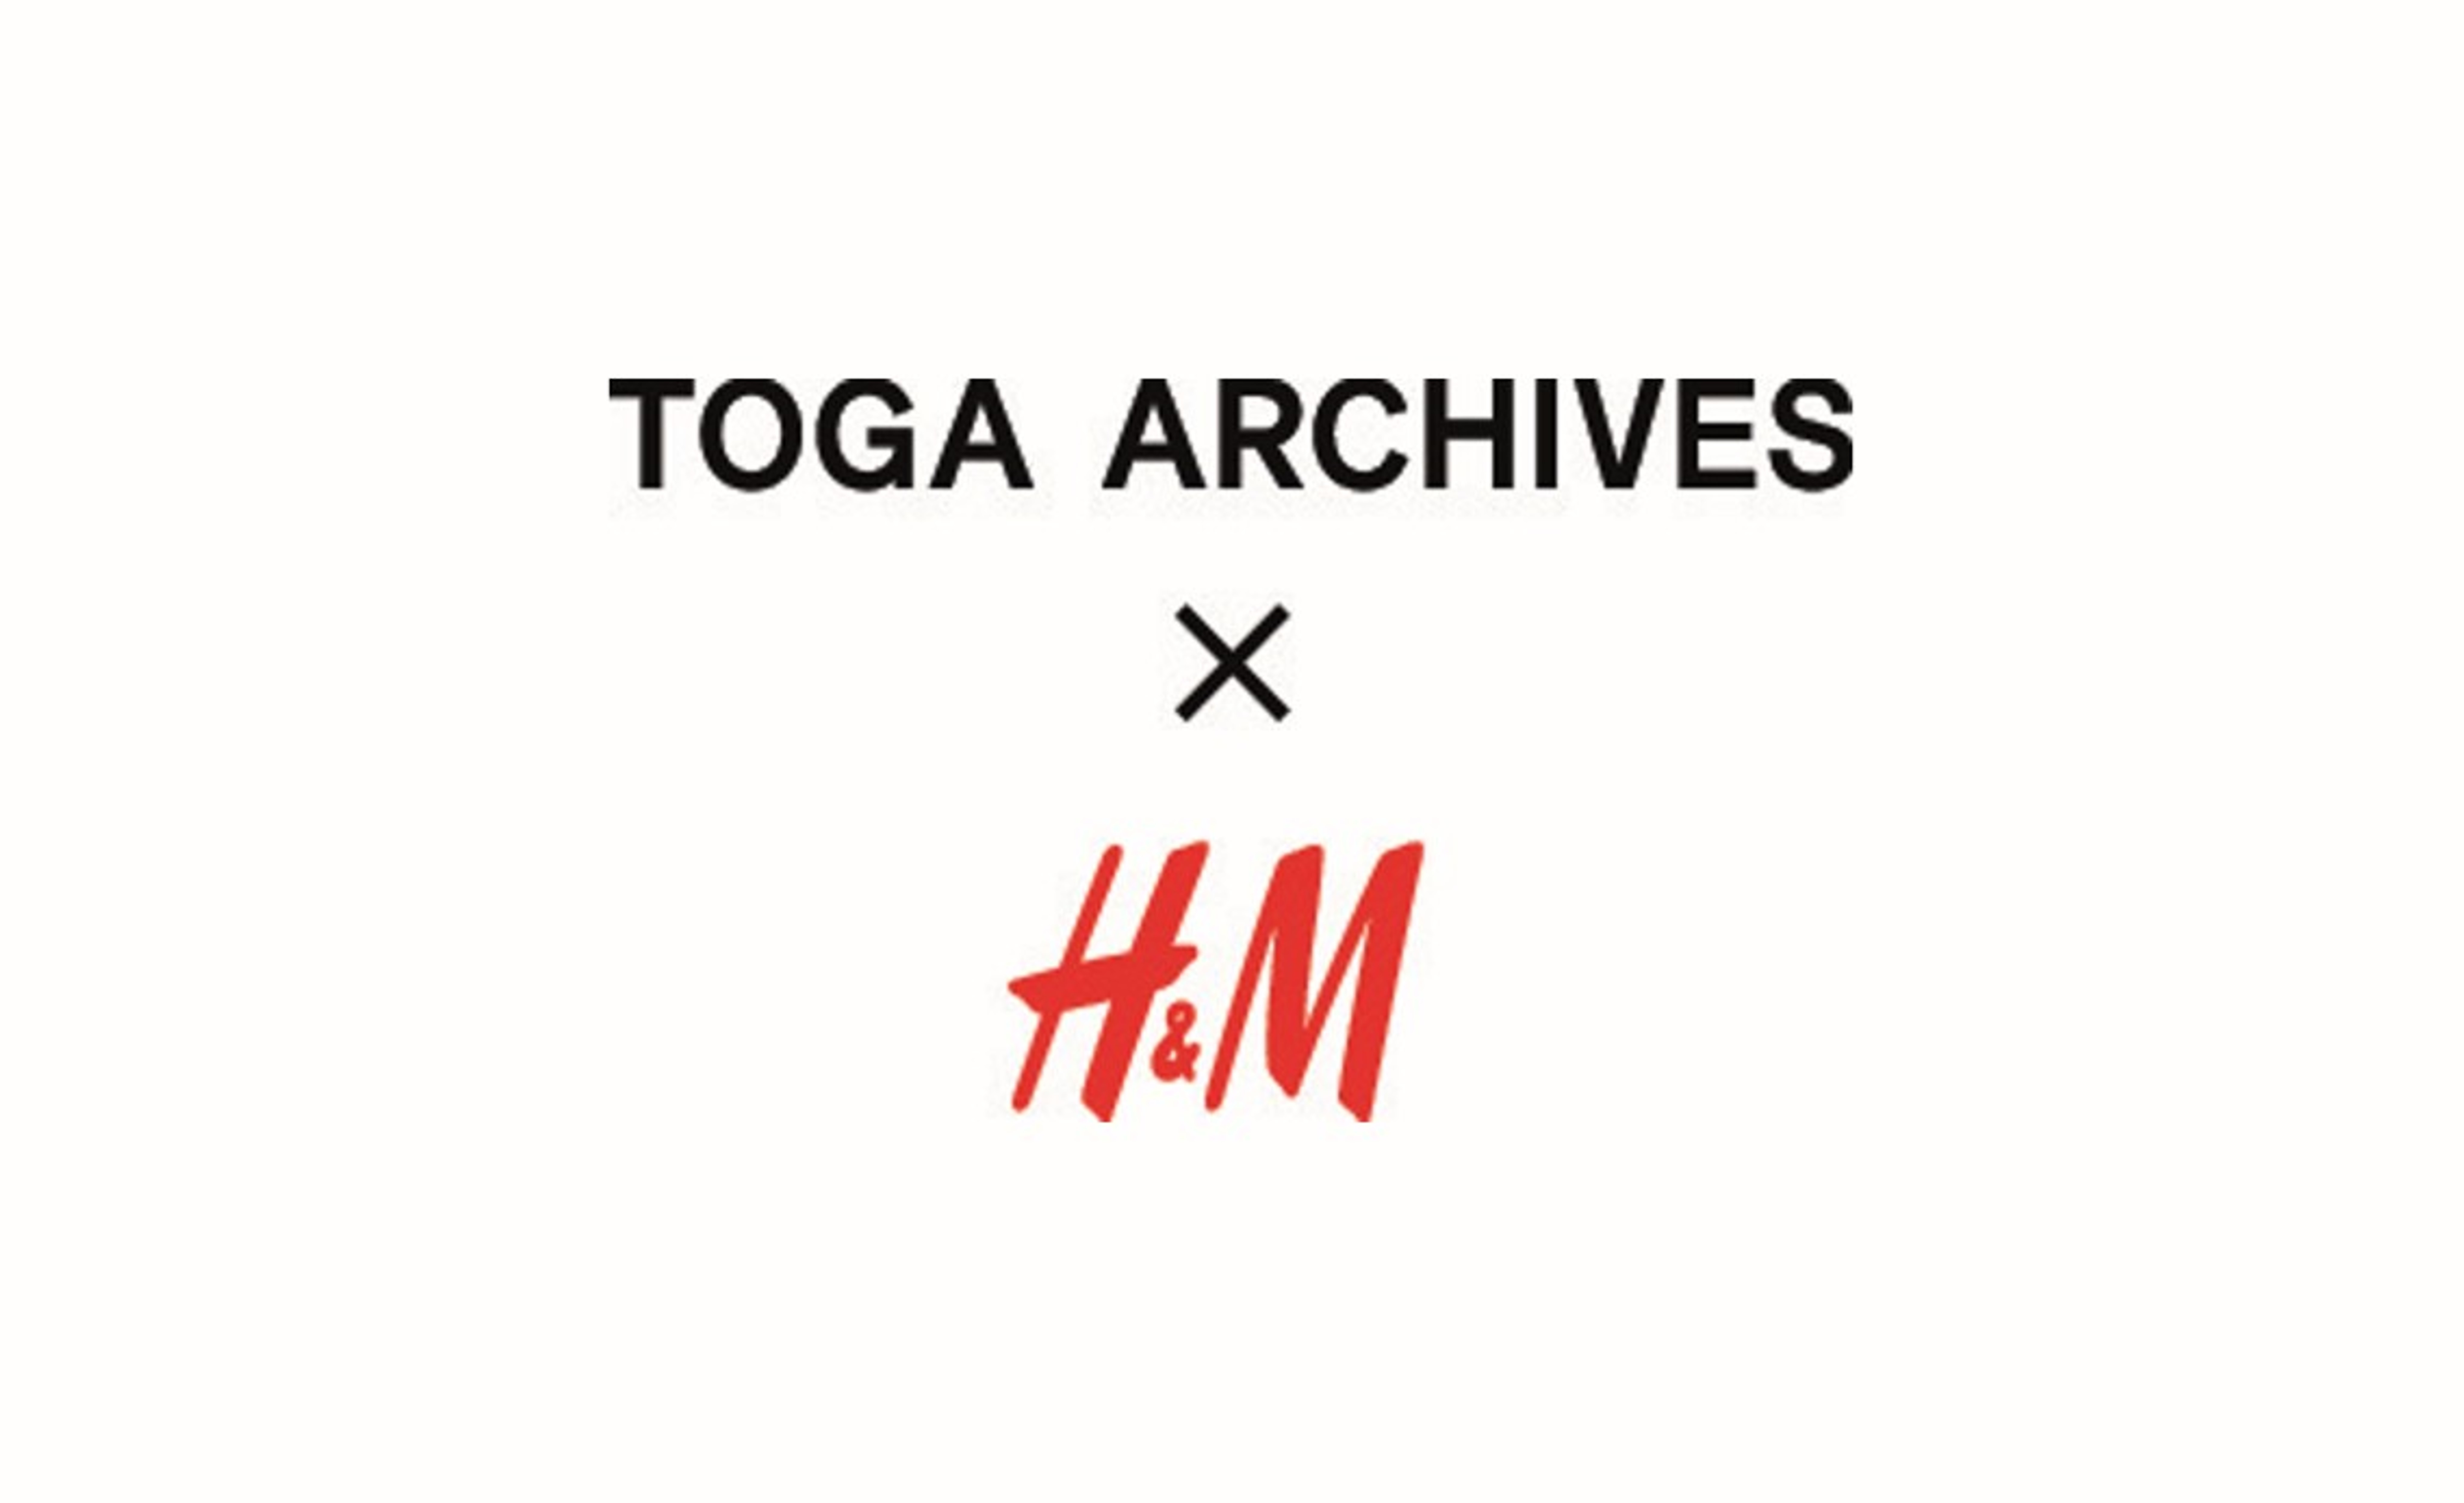 TOGA ARCHIVES x H&M1